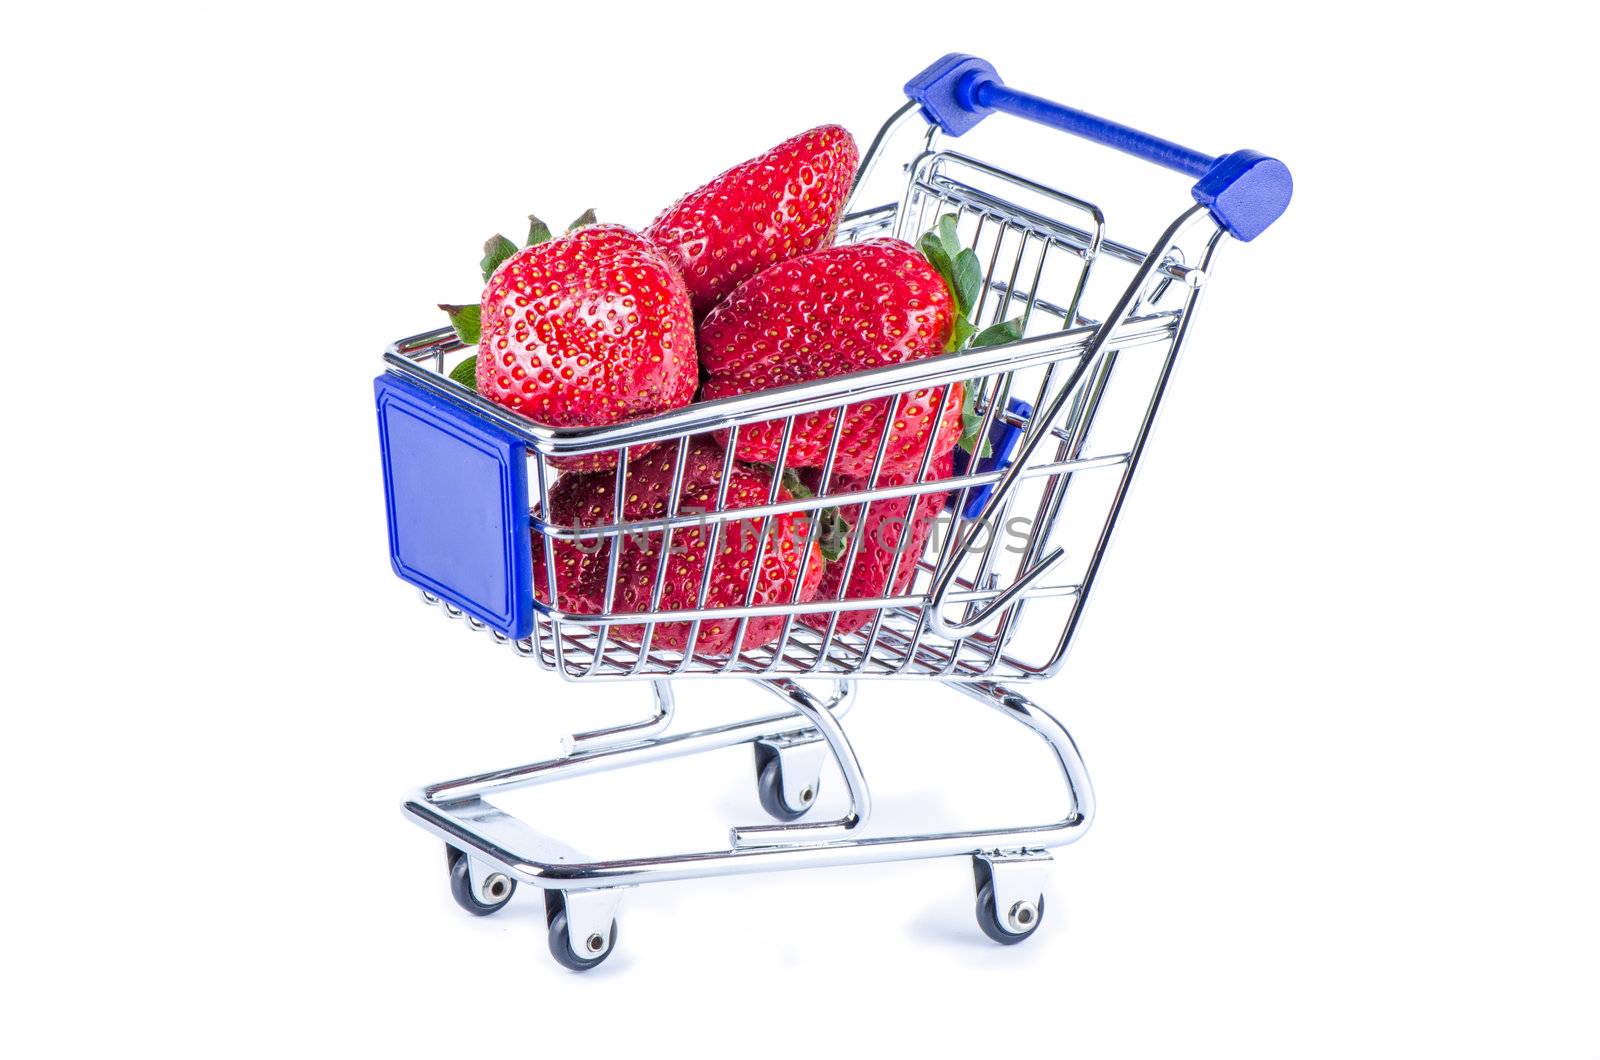 Miniature shopping cart filled up with strawberries